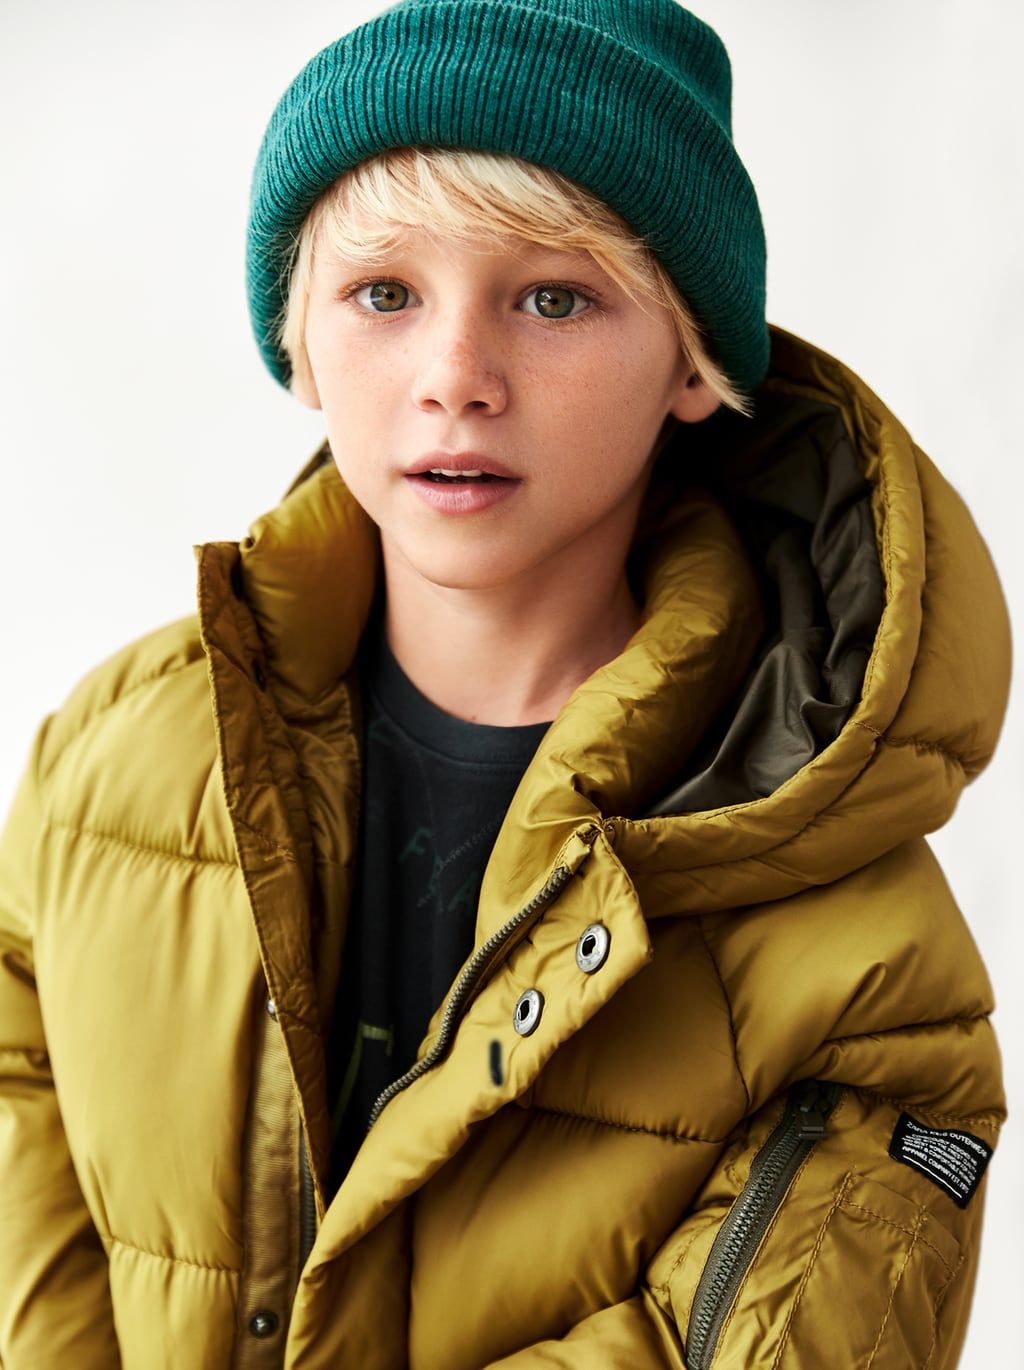 Finding the best boys jackets for your
kids